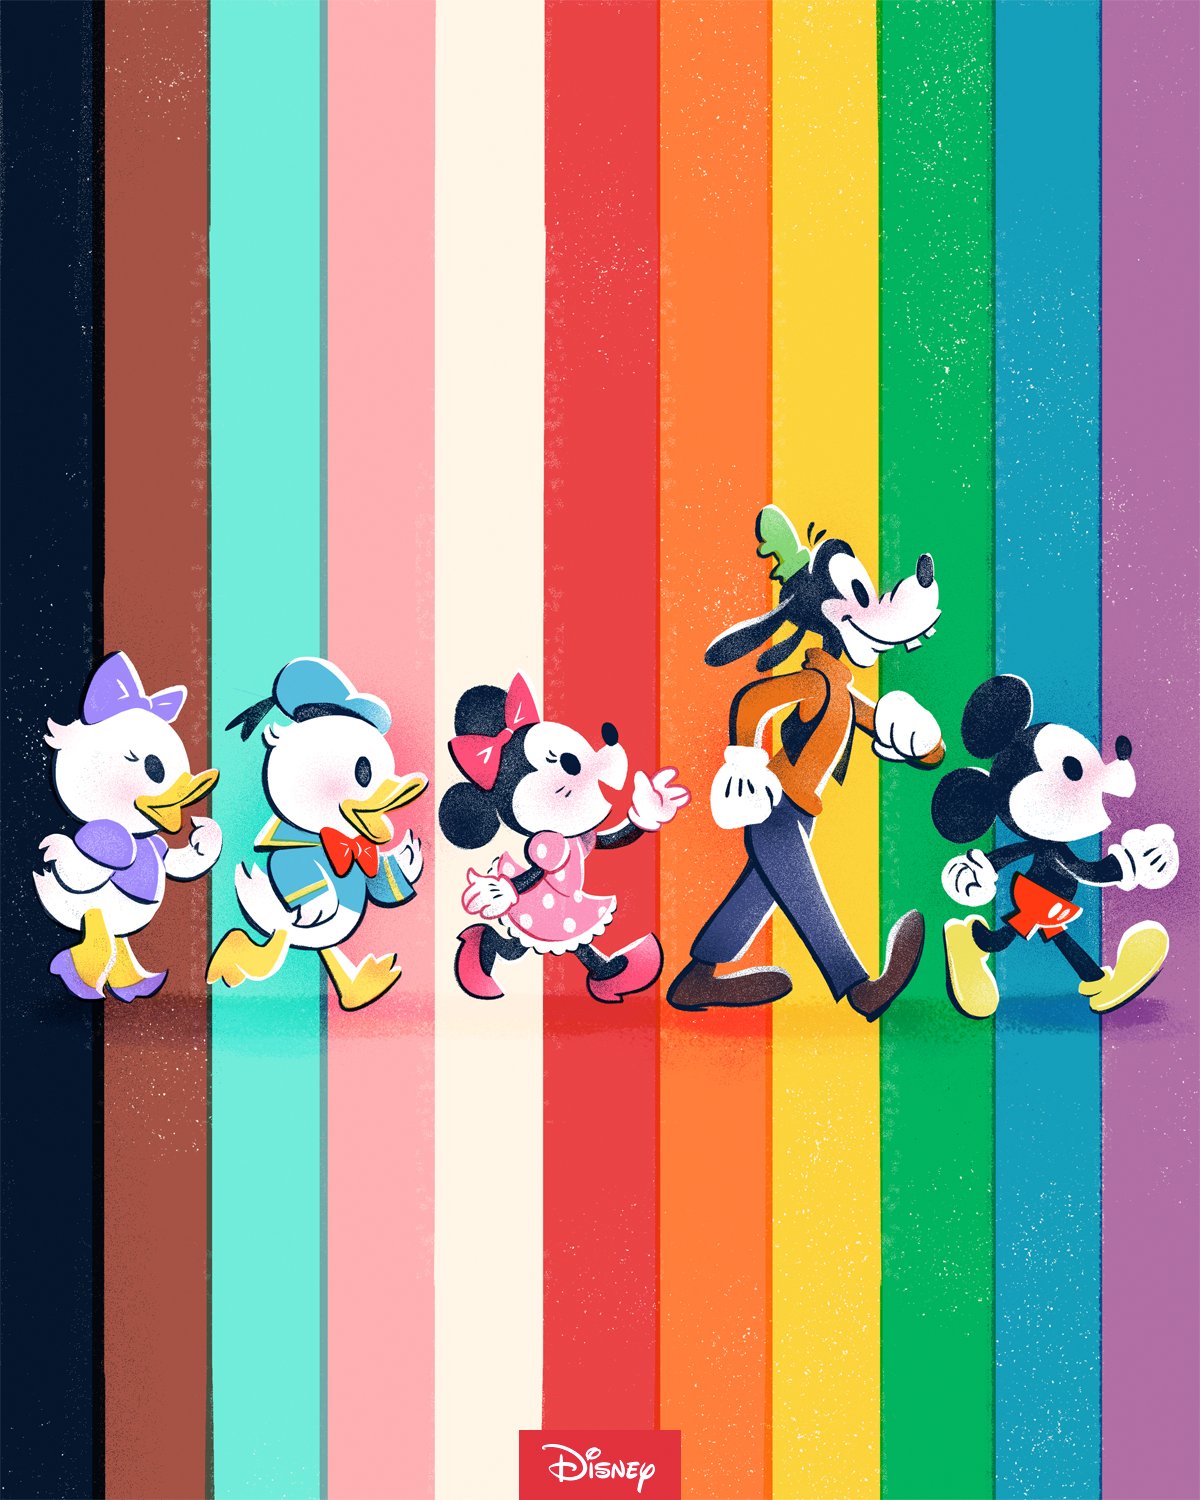 Disney's room for everyone under the rainbow